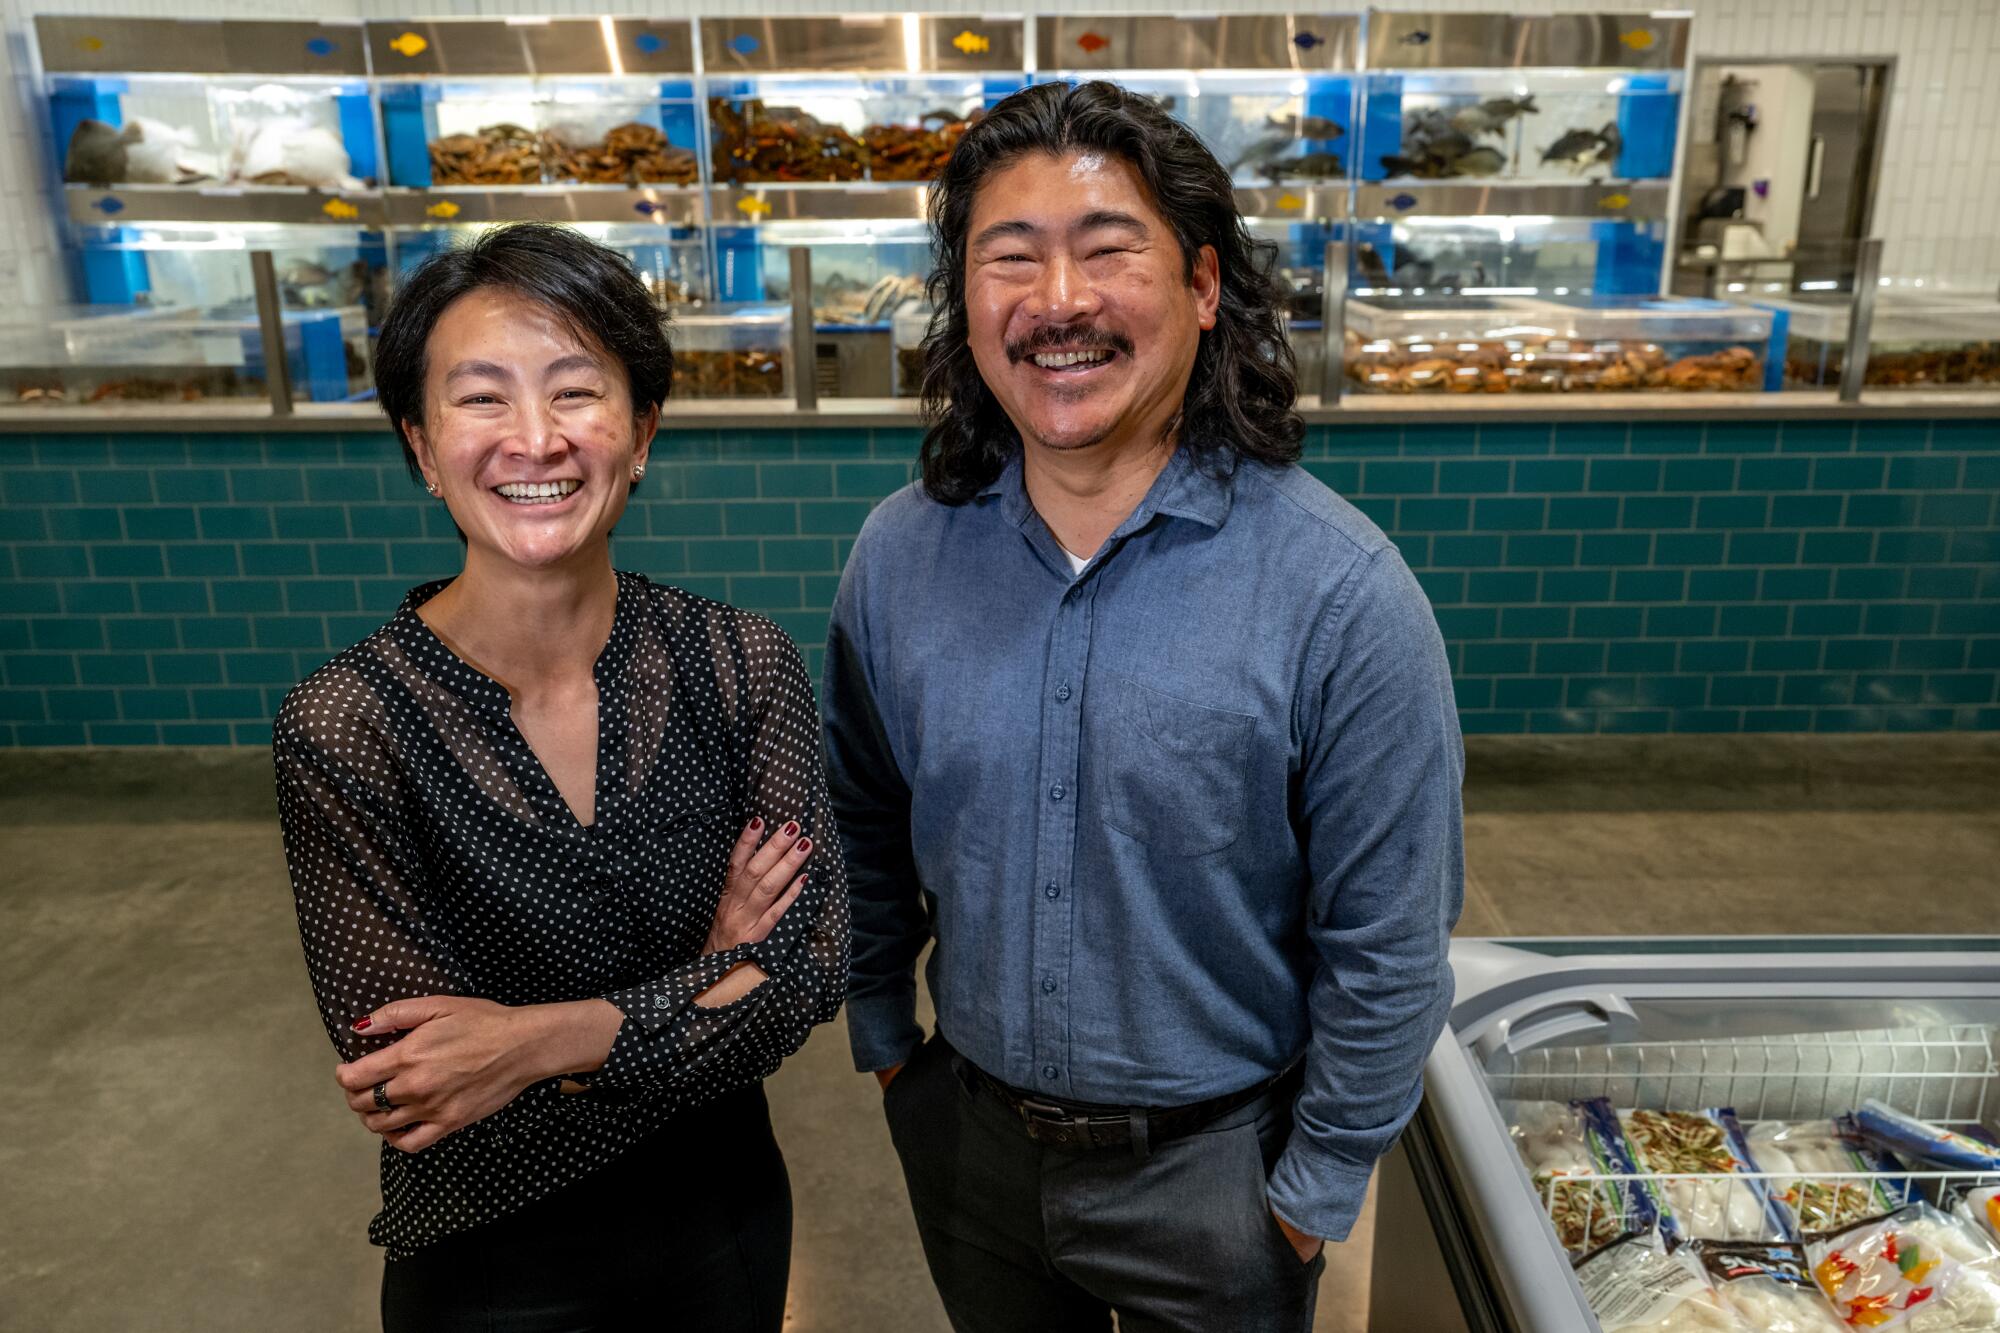 Alice Chen and her brother, Jonson Chen, stand in a 99 Ranch location.